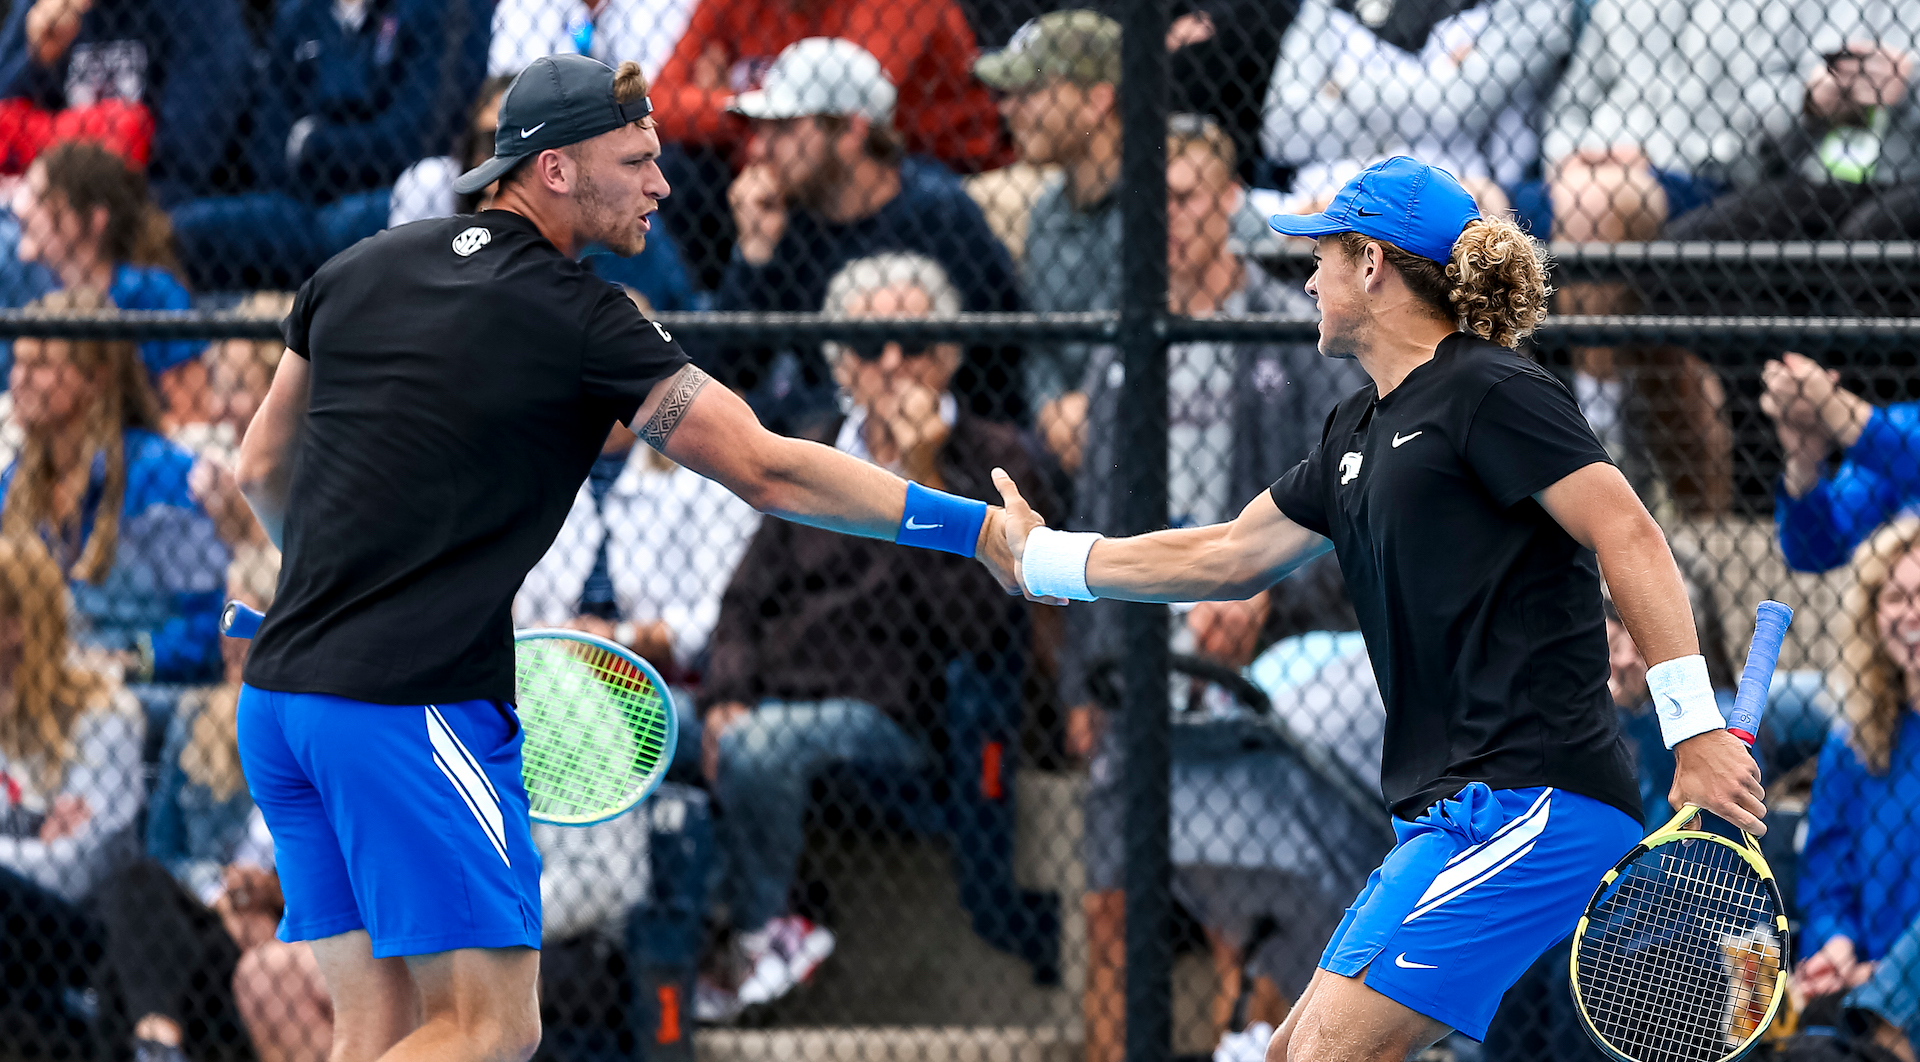 Two Wildcats Ranked Within Top 10 of Singles for First Time in History